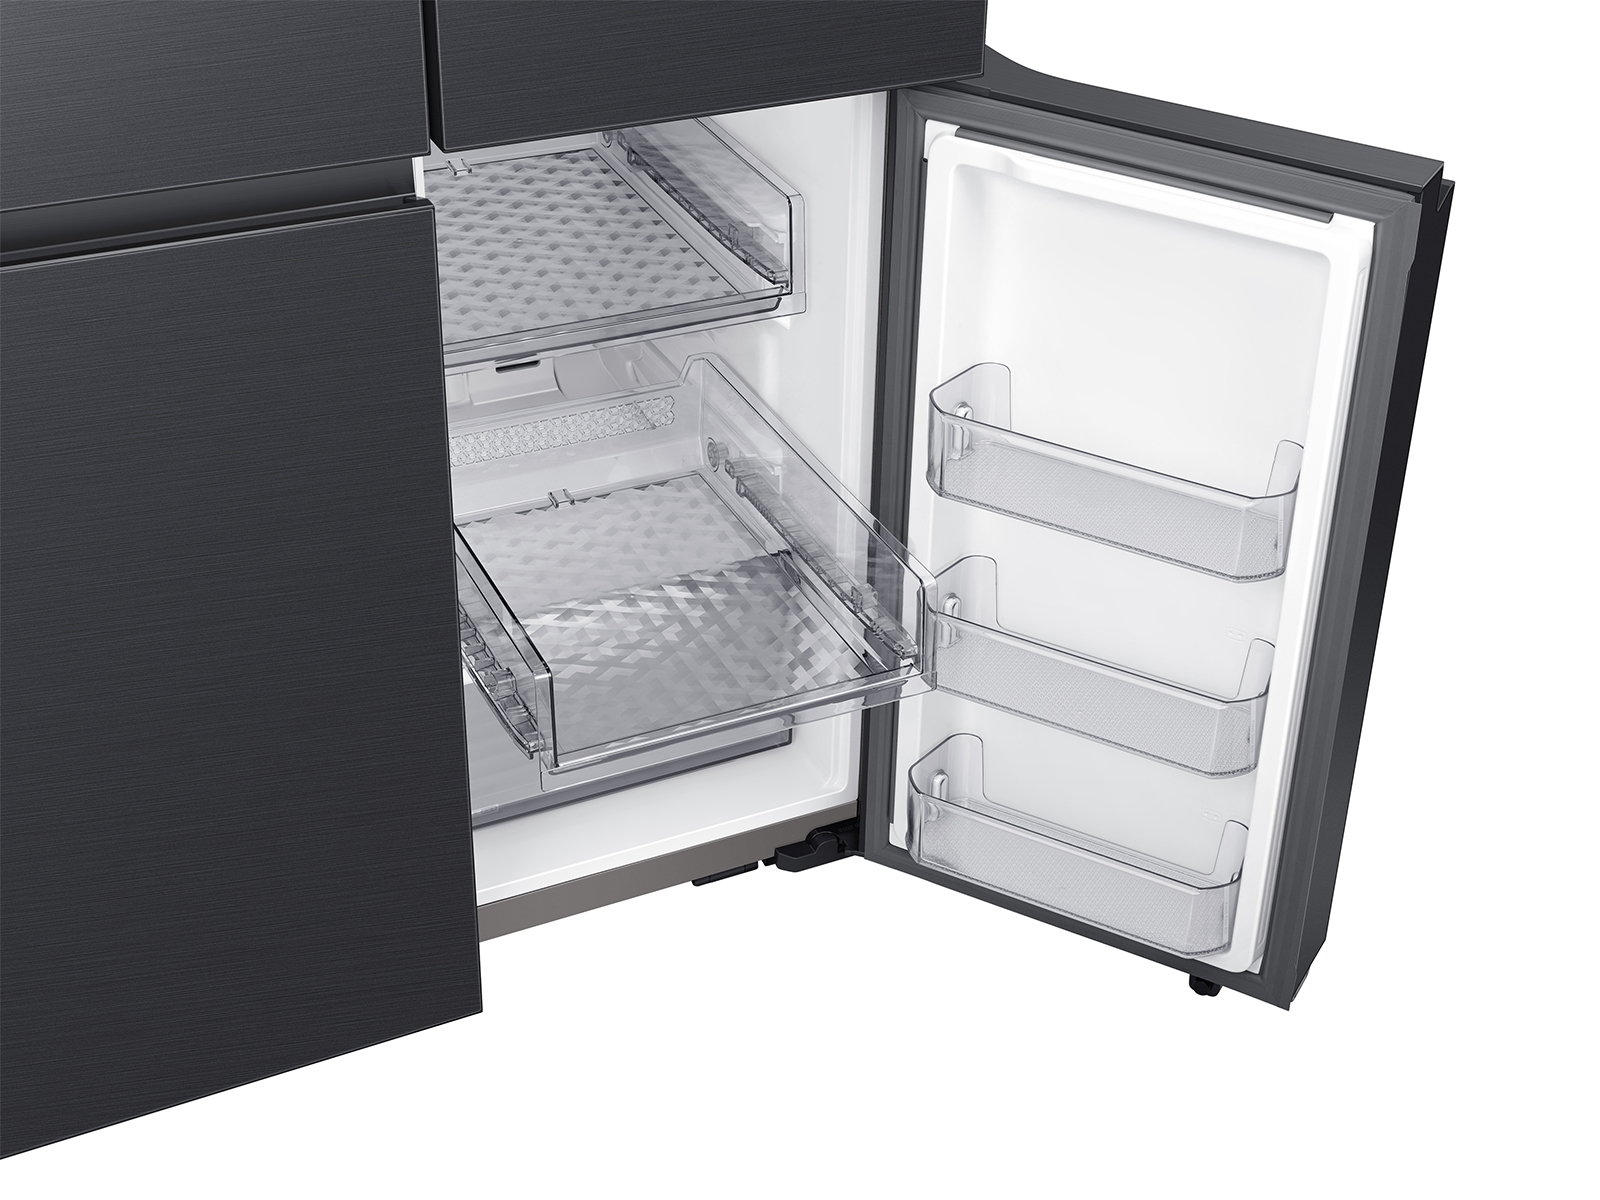 Samsung 29 cu. ft. Smart BESPOKE 4-Door Flex™ Refrigerator with  Customizable Panel Colors, Panels Not Included & Reviews